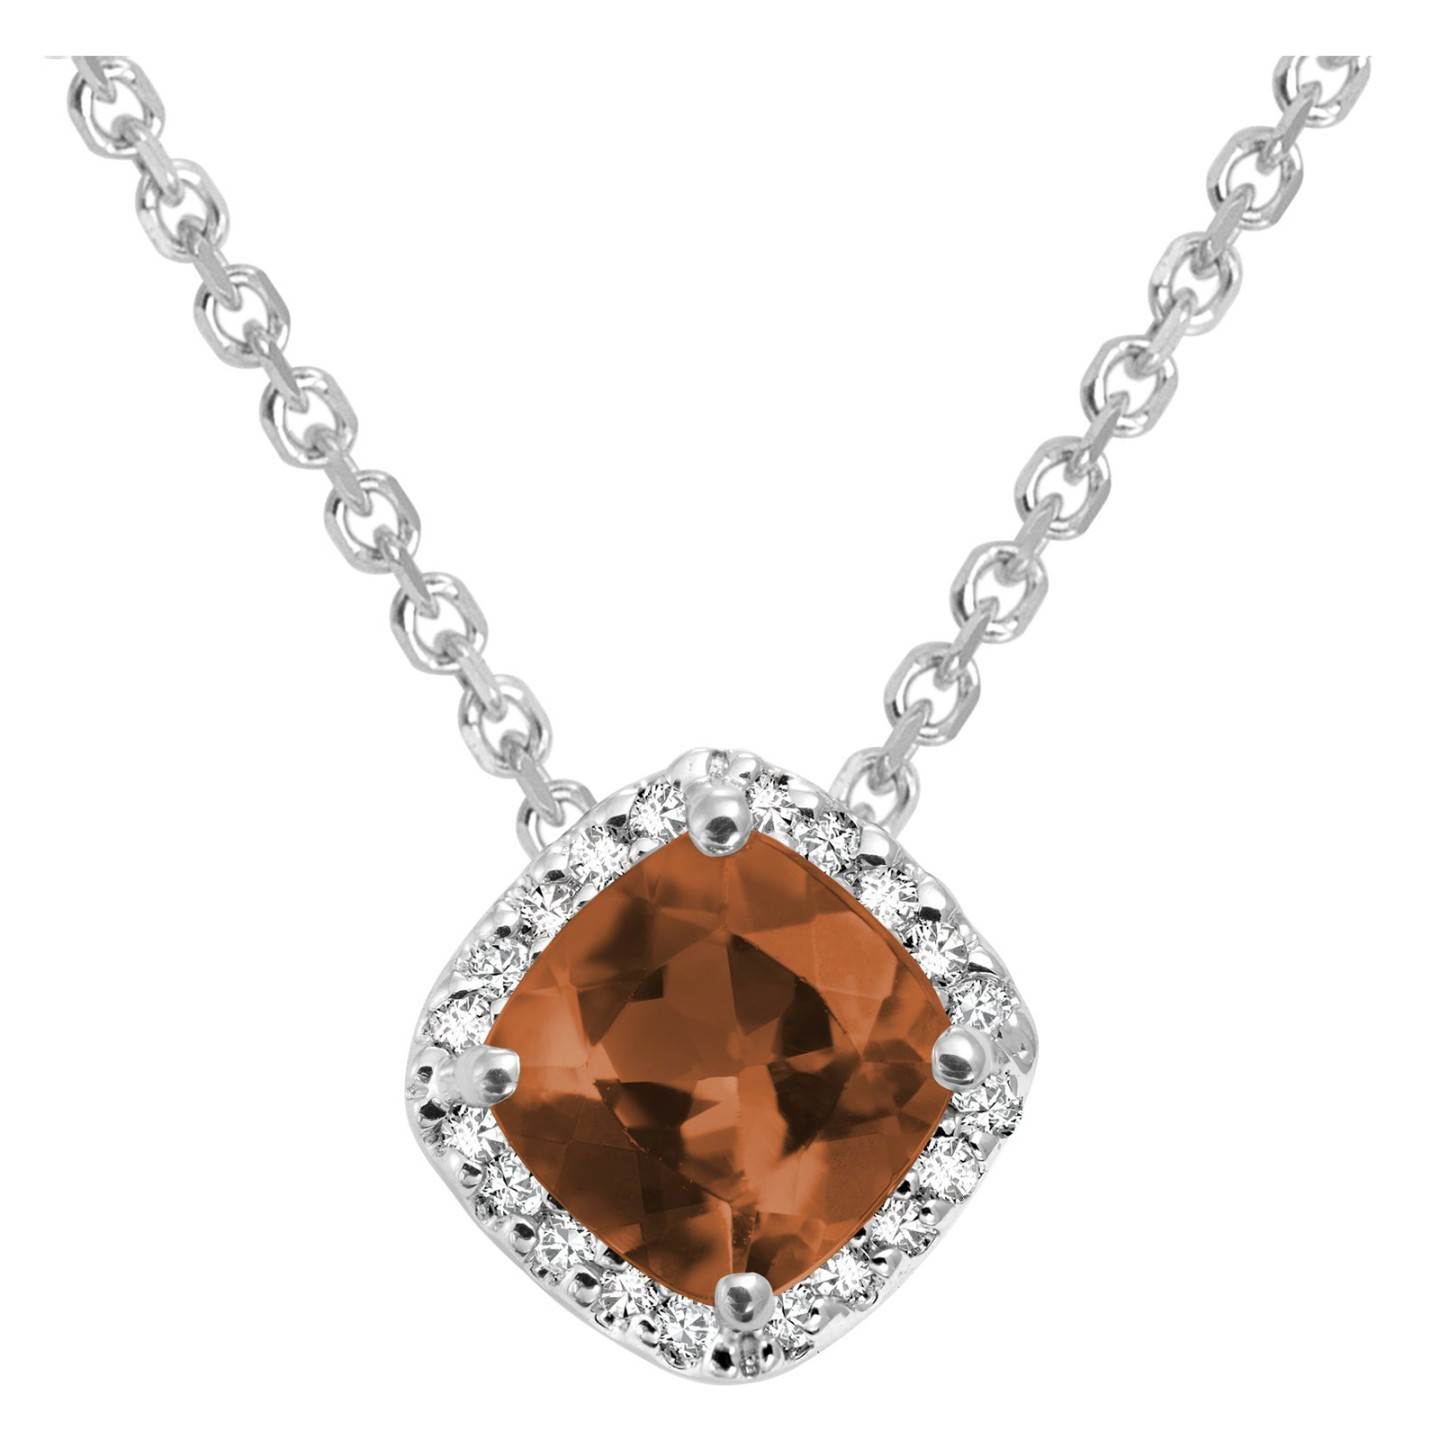 1 1/5 CTW Cushion Brown Topaz Halo Pendant Necklace in 14K White Gold With Chain (MV3143)